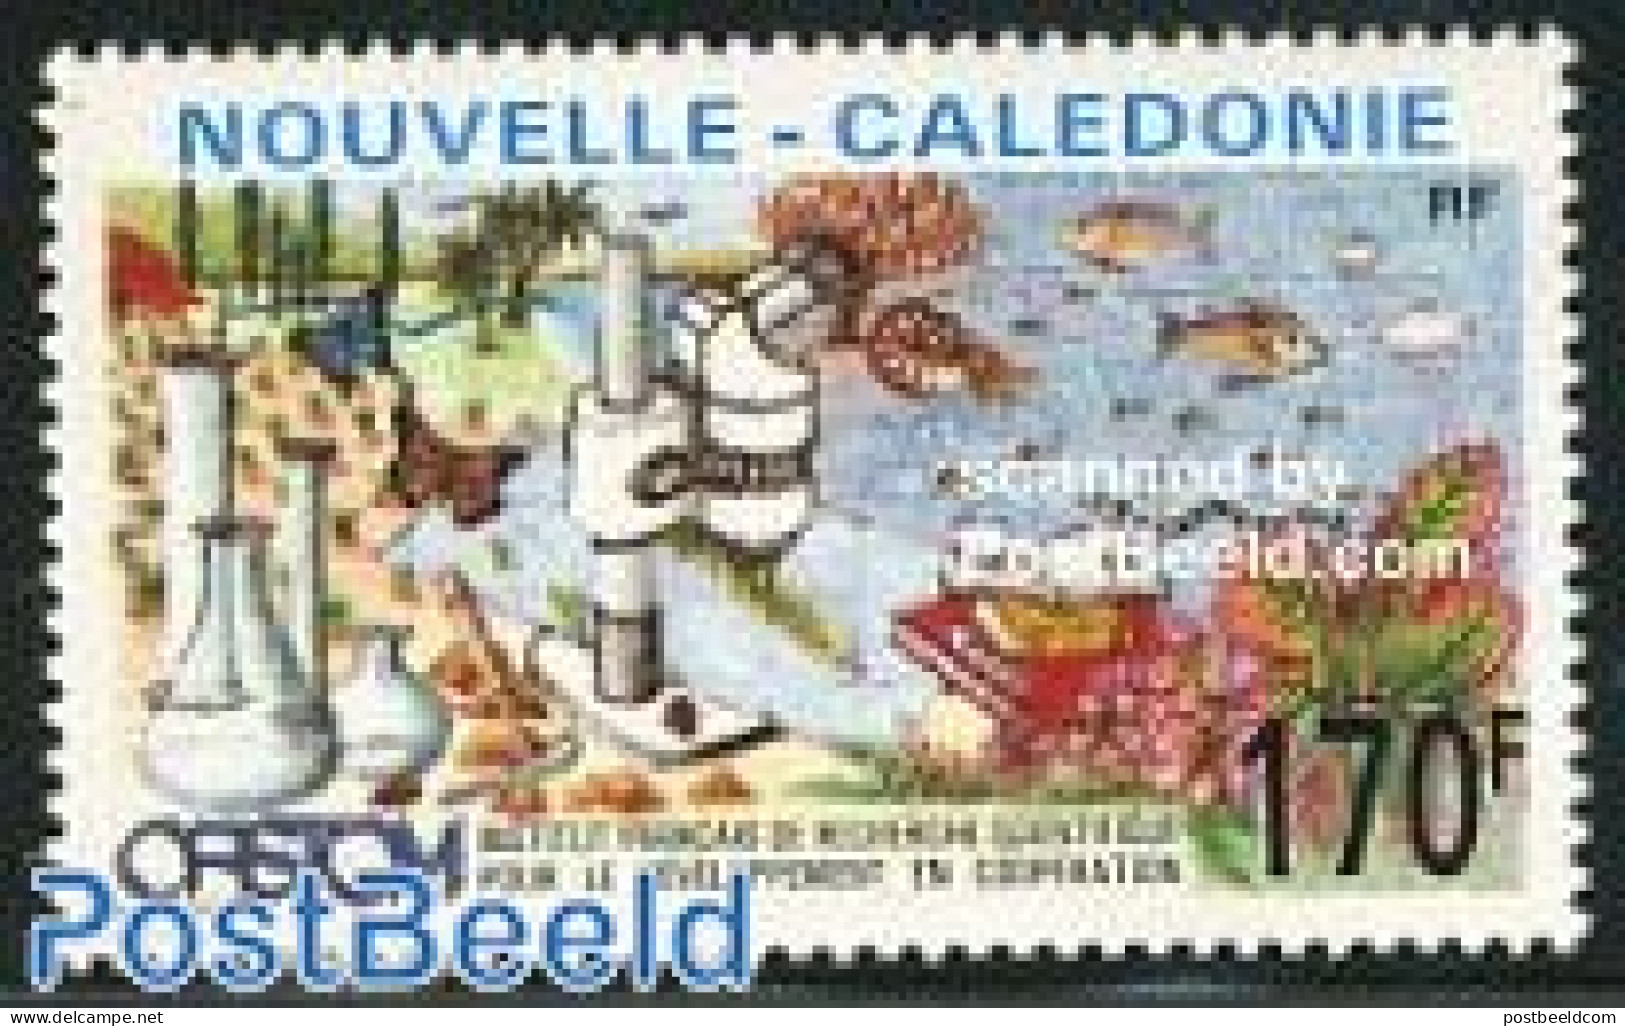 New Caledonia 1991 Science 1v, Mint NH, Nature - Science - Butterflies - Fish - Chemistry & Chemists - Art - Books - Ungebraucht